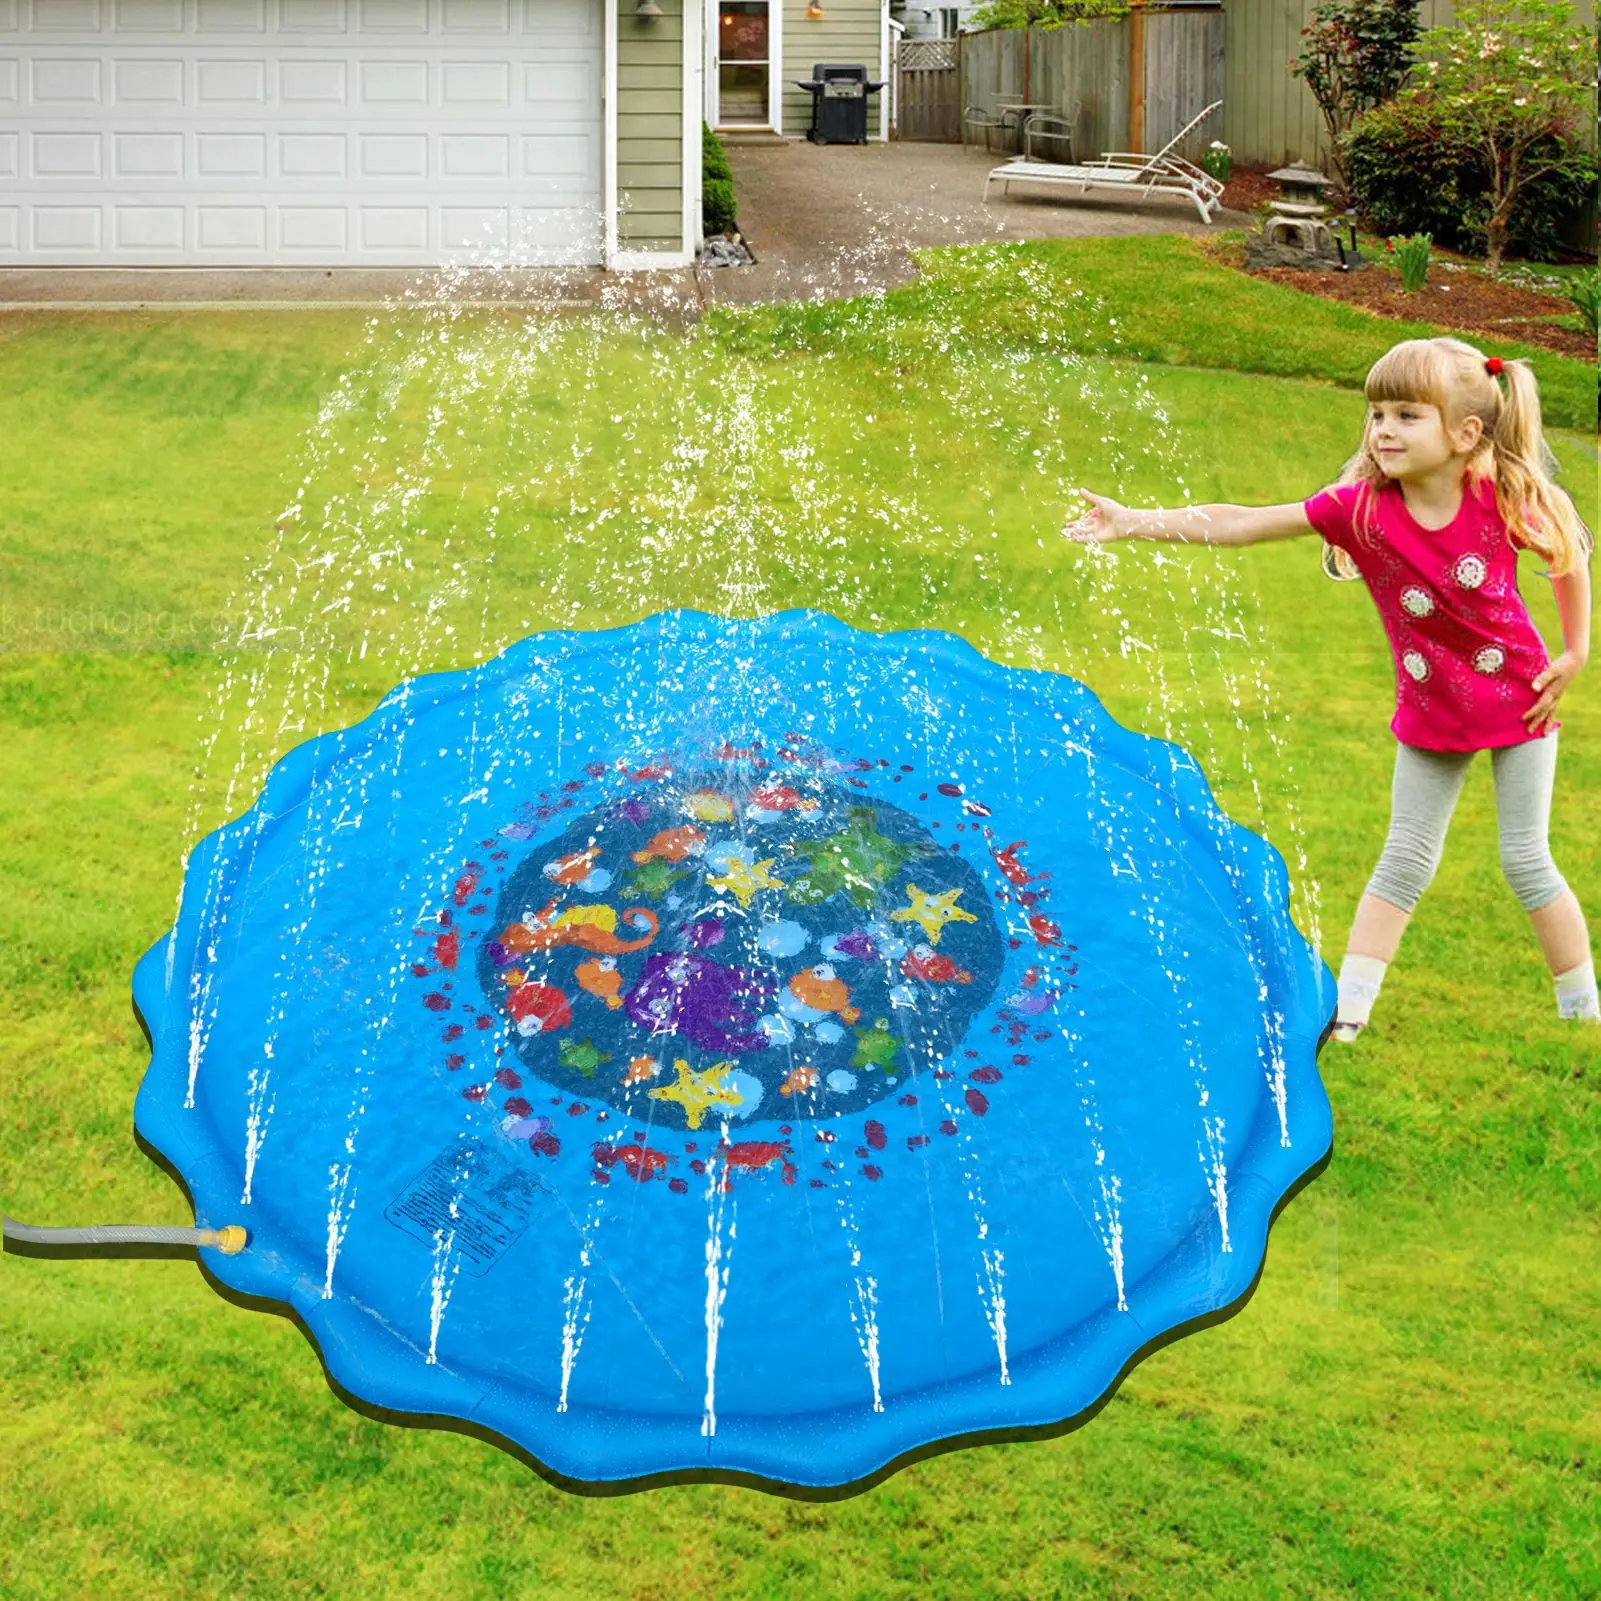 Inflatable water spray pad new children's outdoor lawn game mat summer sprinkler pad